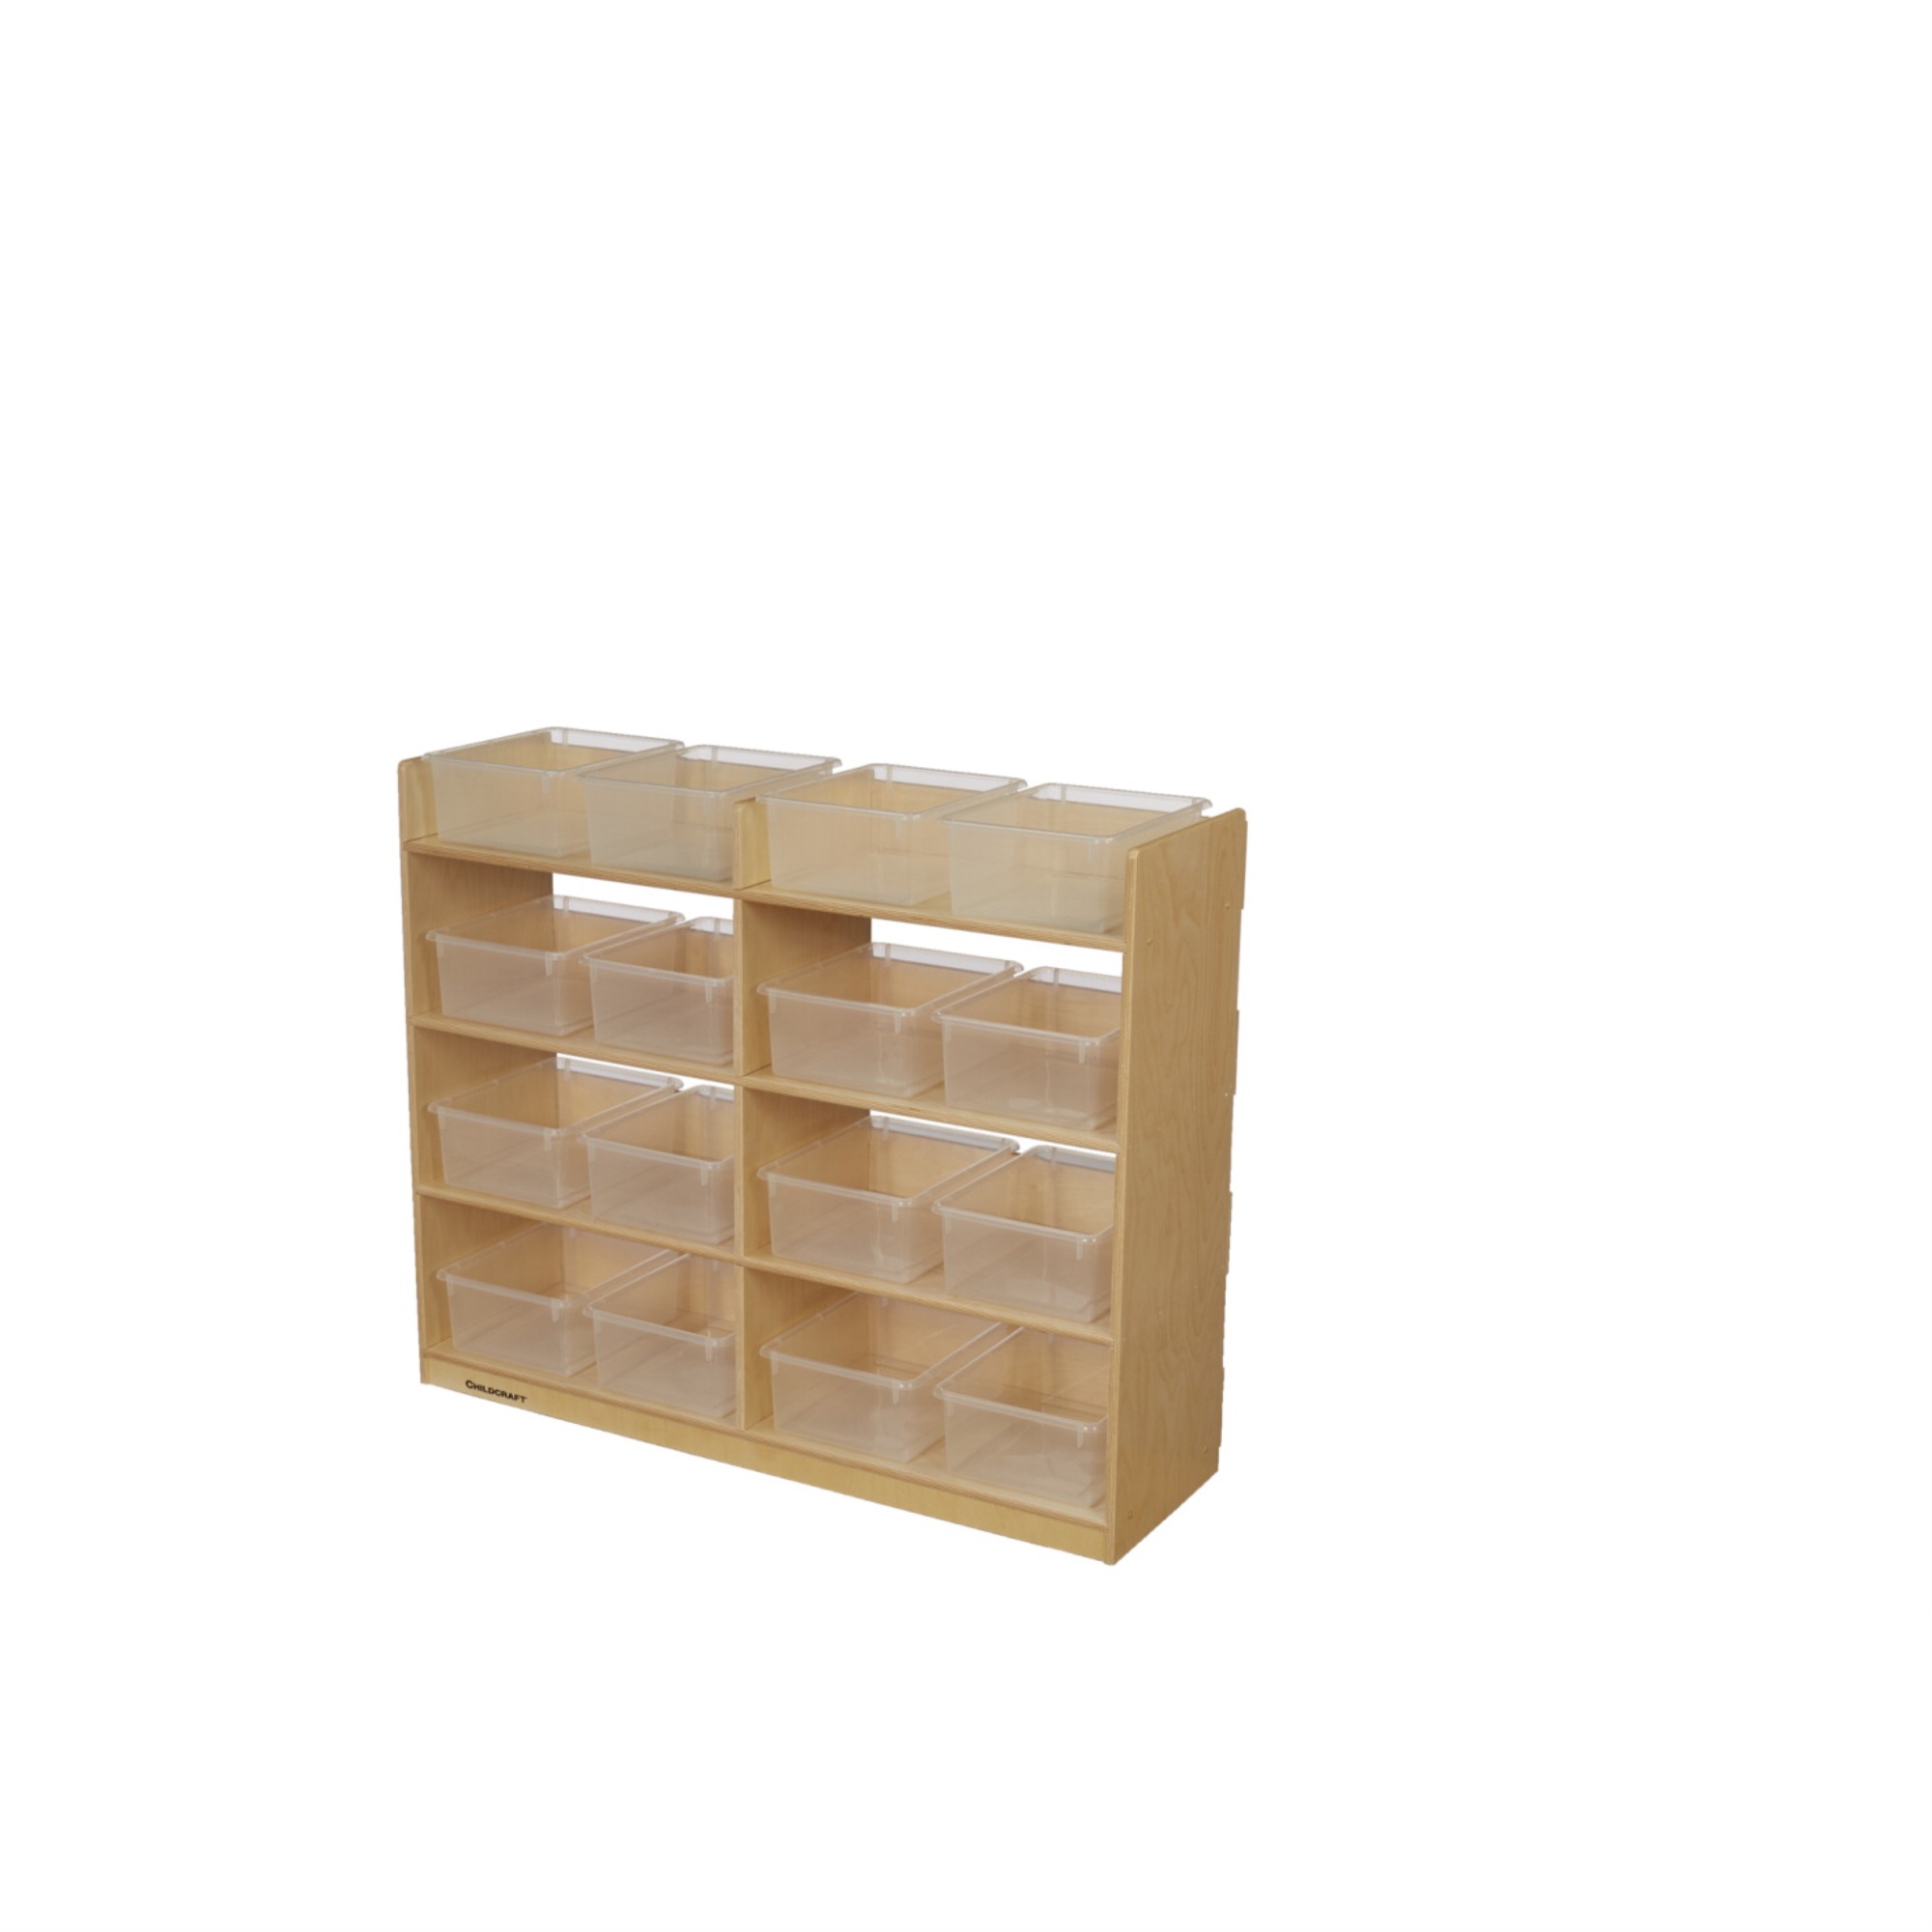 Childcraft Mobile Book Storage Unit, 16 Clear Trays, 47-3/4 x 14-1/4 x 40 Inches